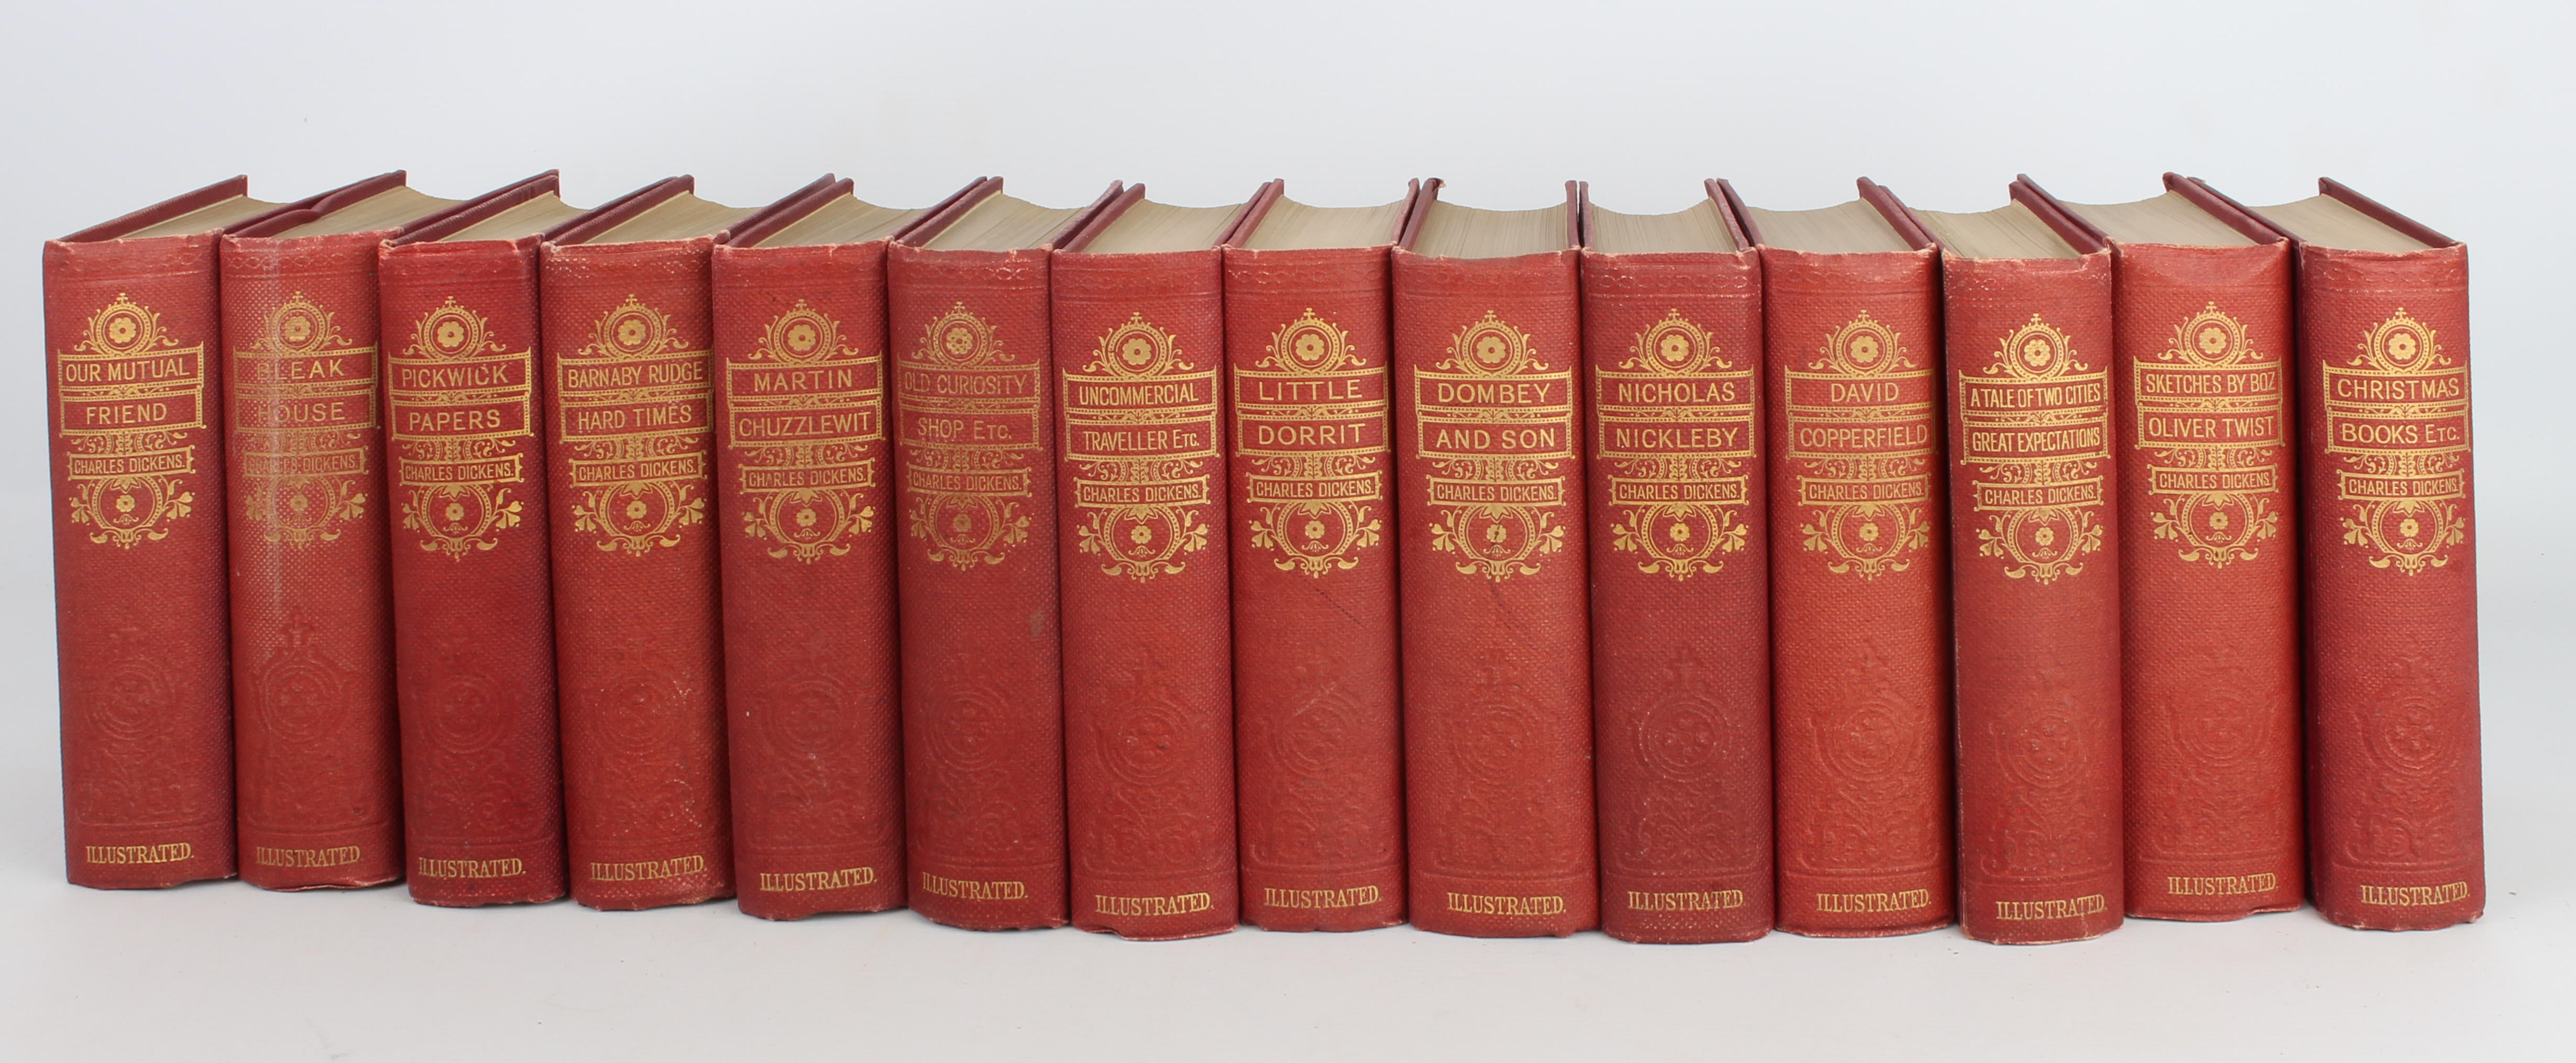 Charles Dickens - Works of Charles Dickens, 14 volumes, illustrated (The Waverley Book Co.,